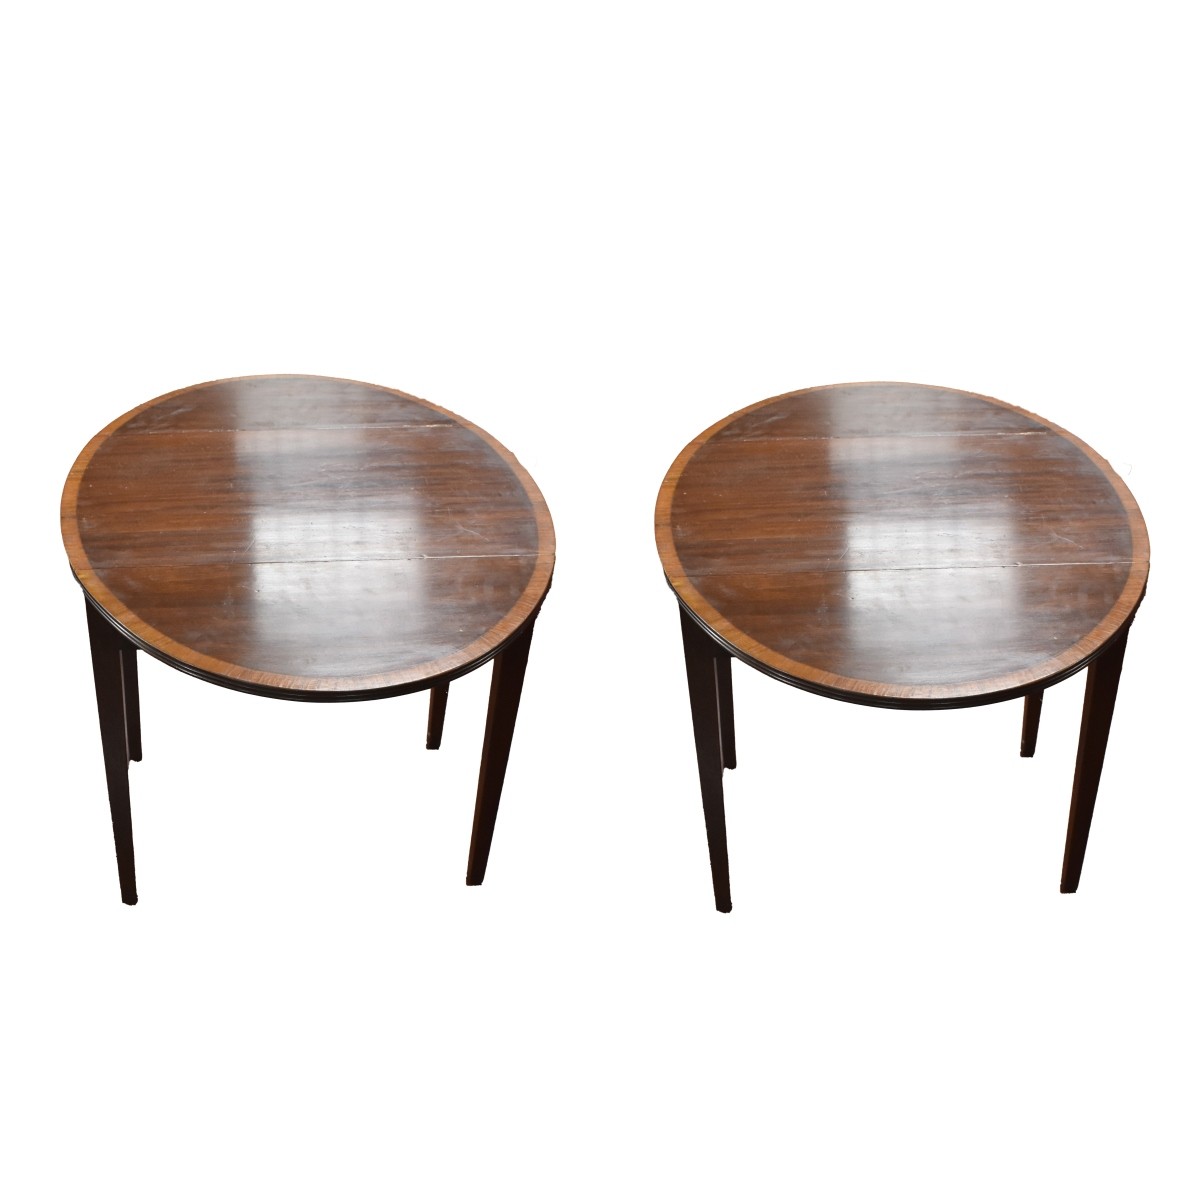 Pair of Federal Style Pembroke Tables